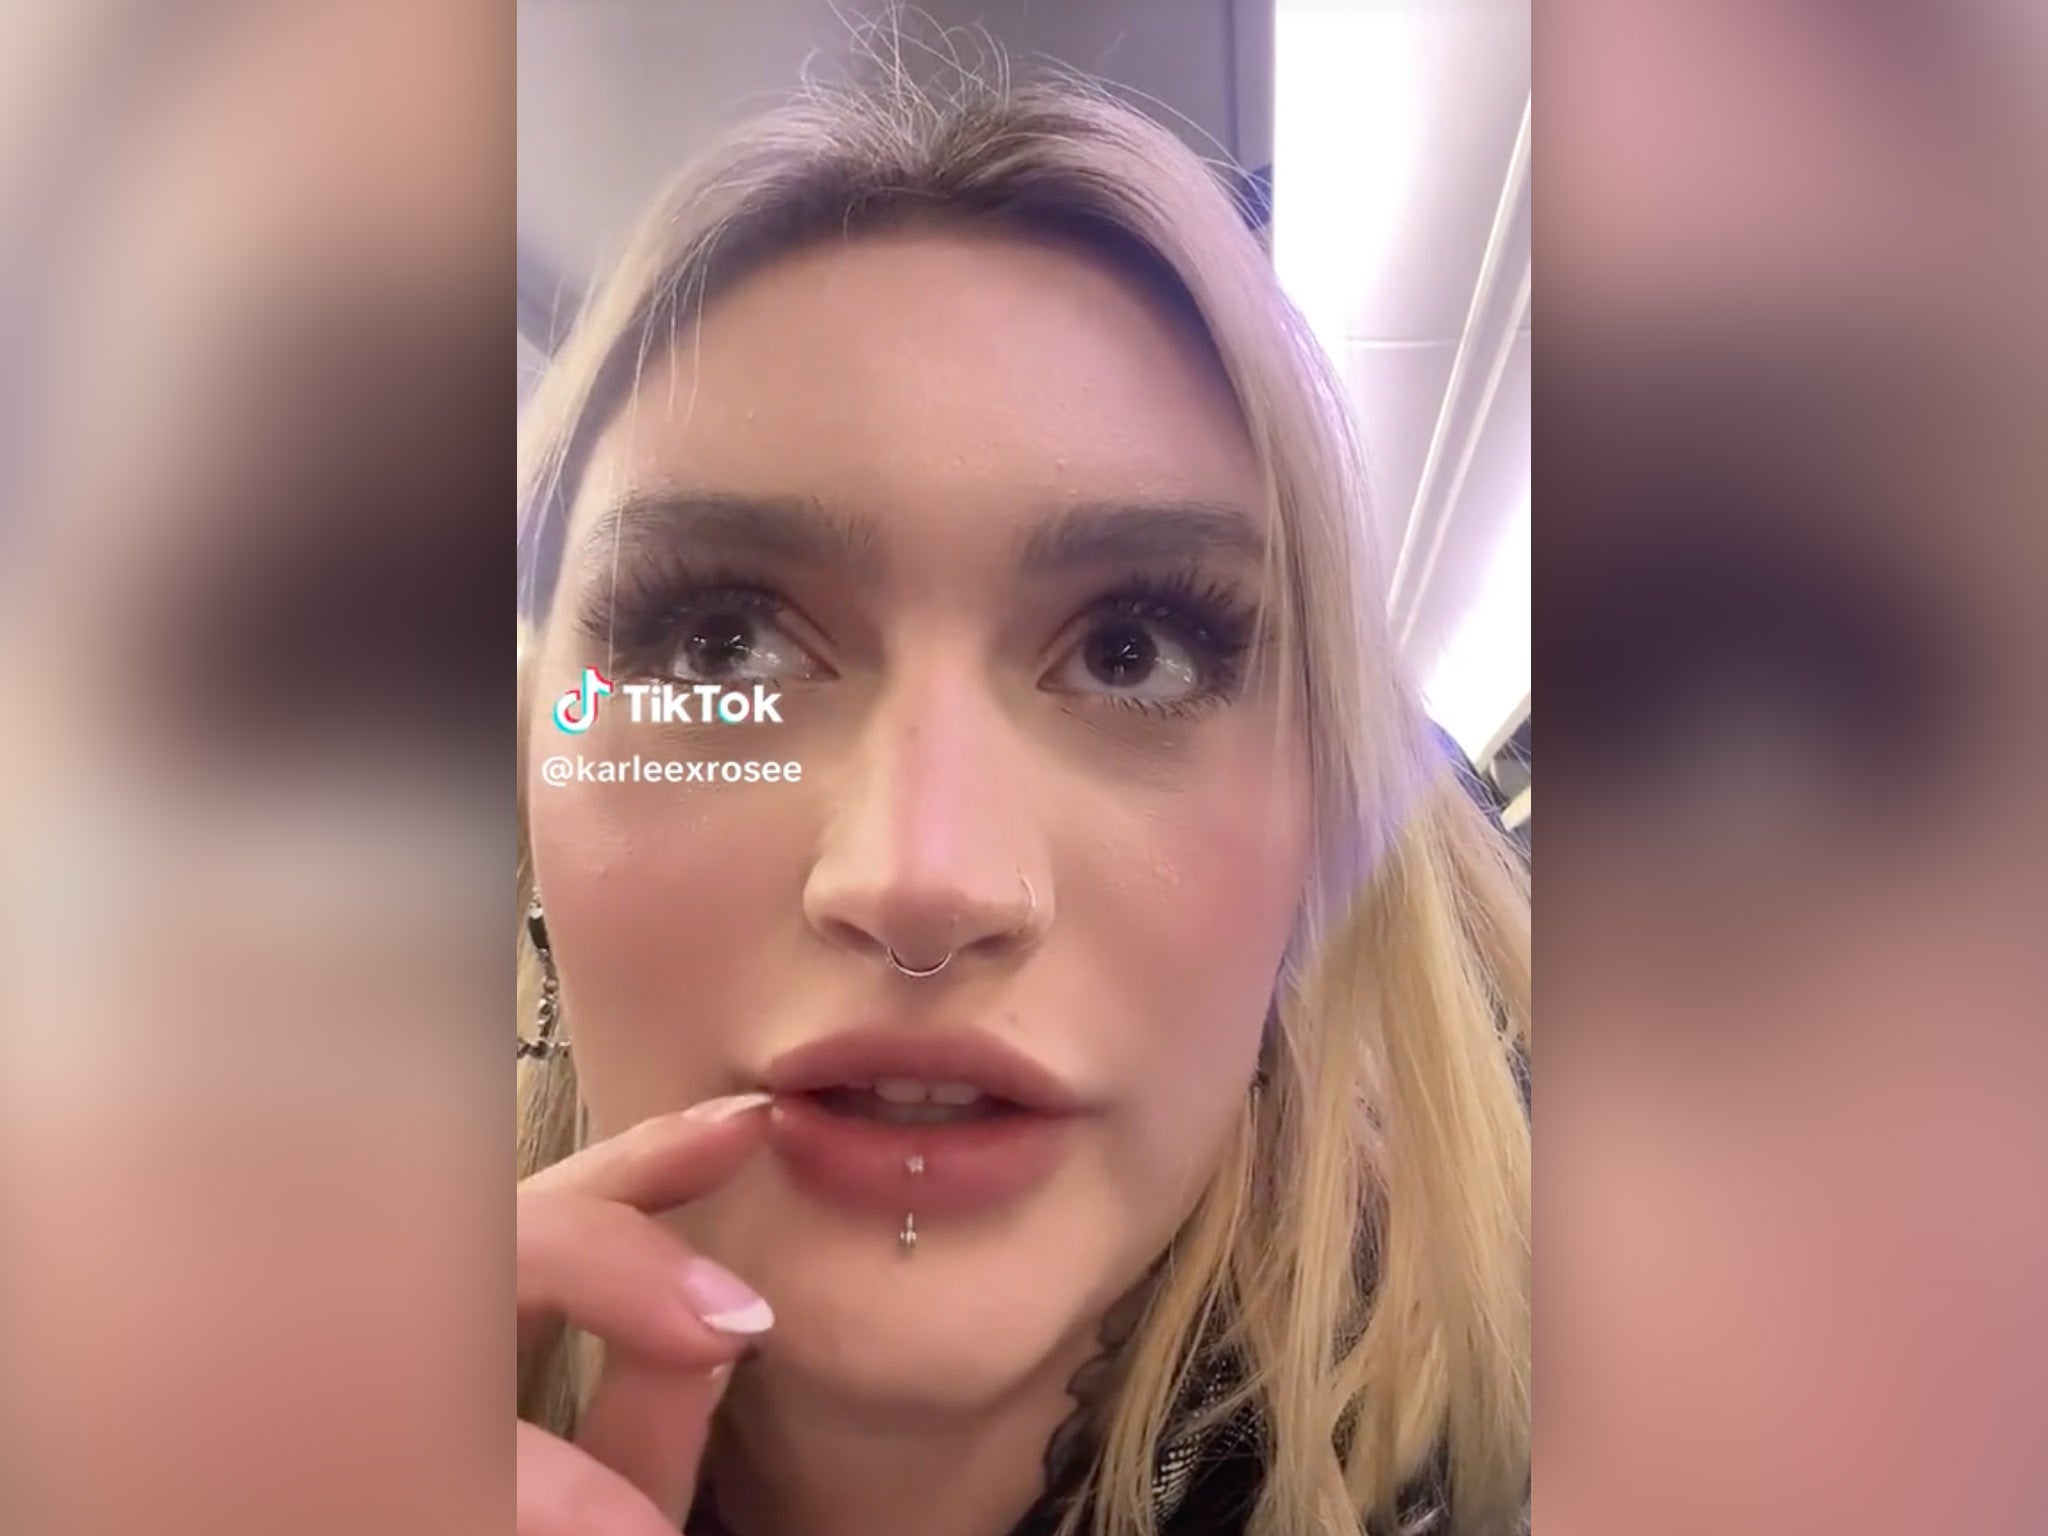 TikTok user karleexrosee was speaking about her experience with United